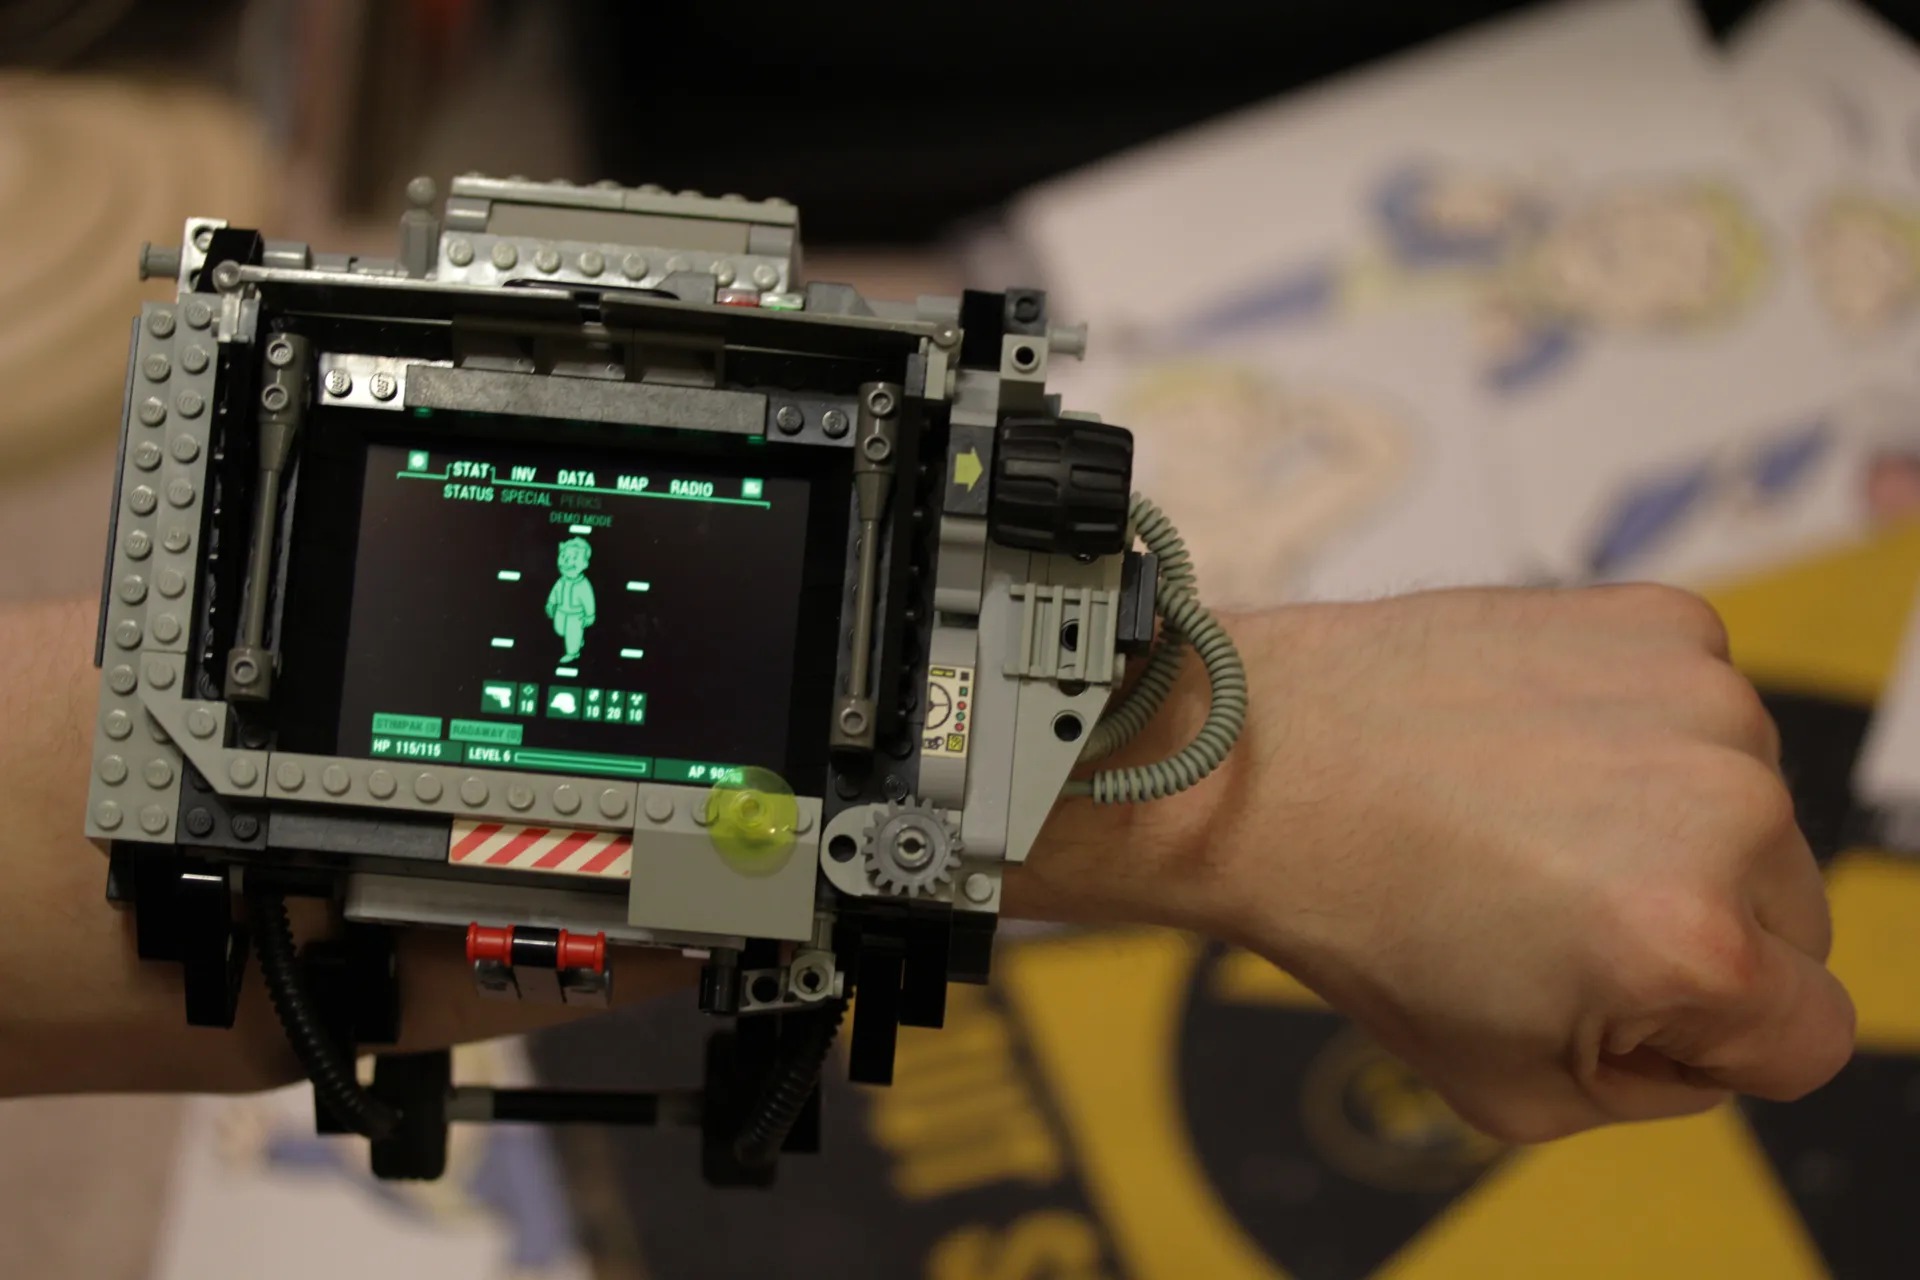 crafting-a-pip-boy-phone-case-for-your-device